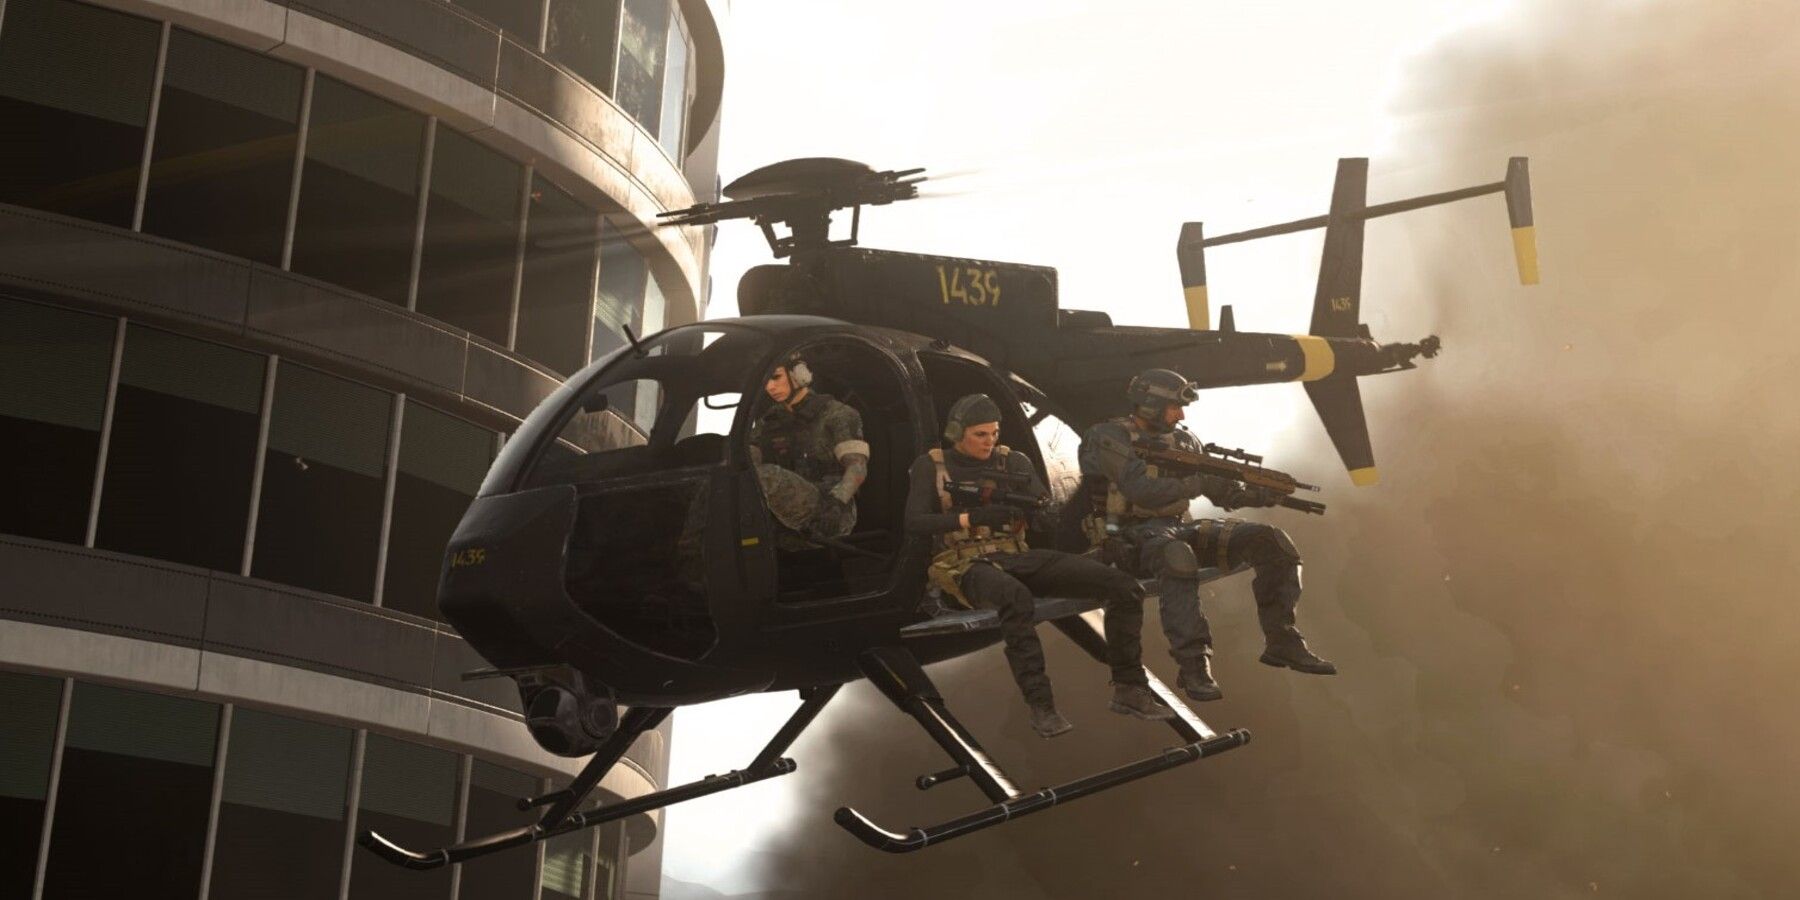 Squad in Helicopter in Warzone2